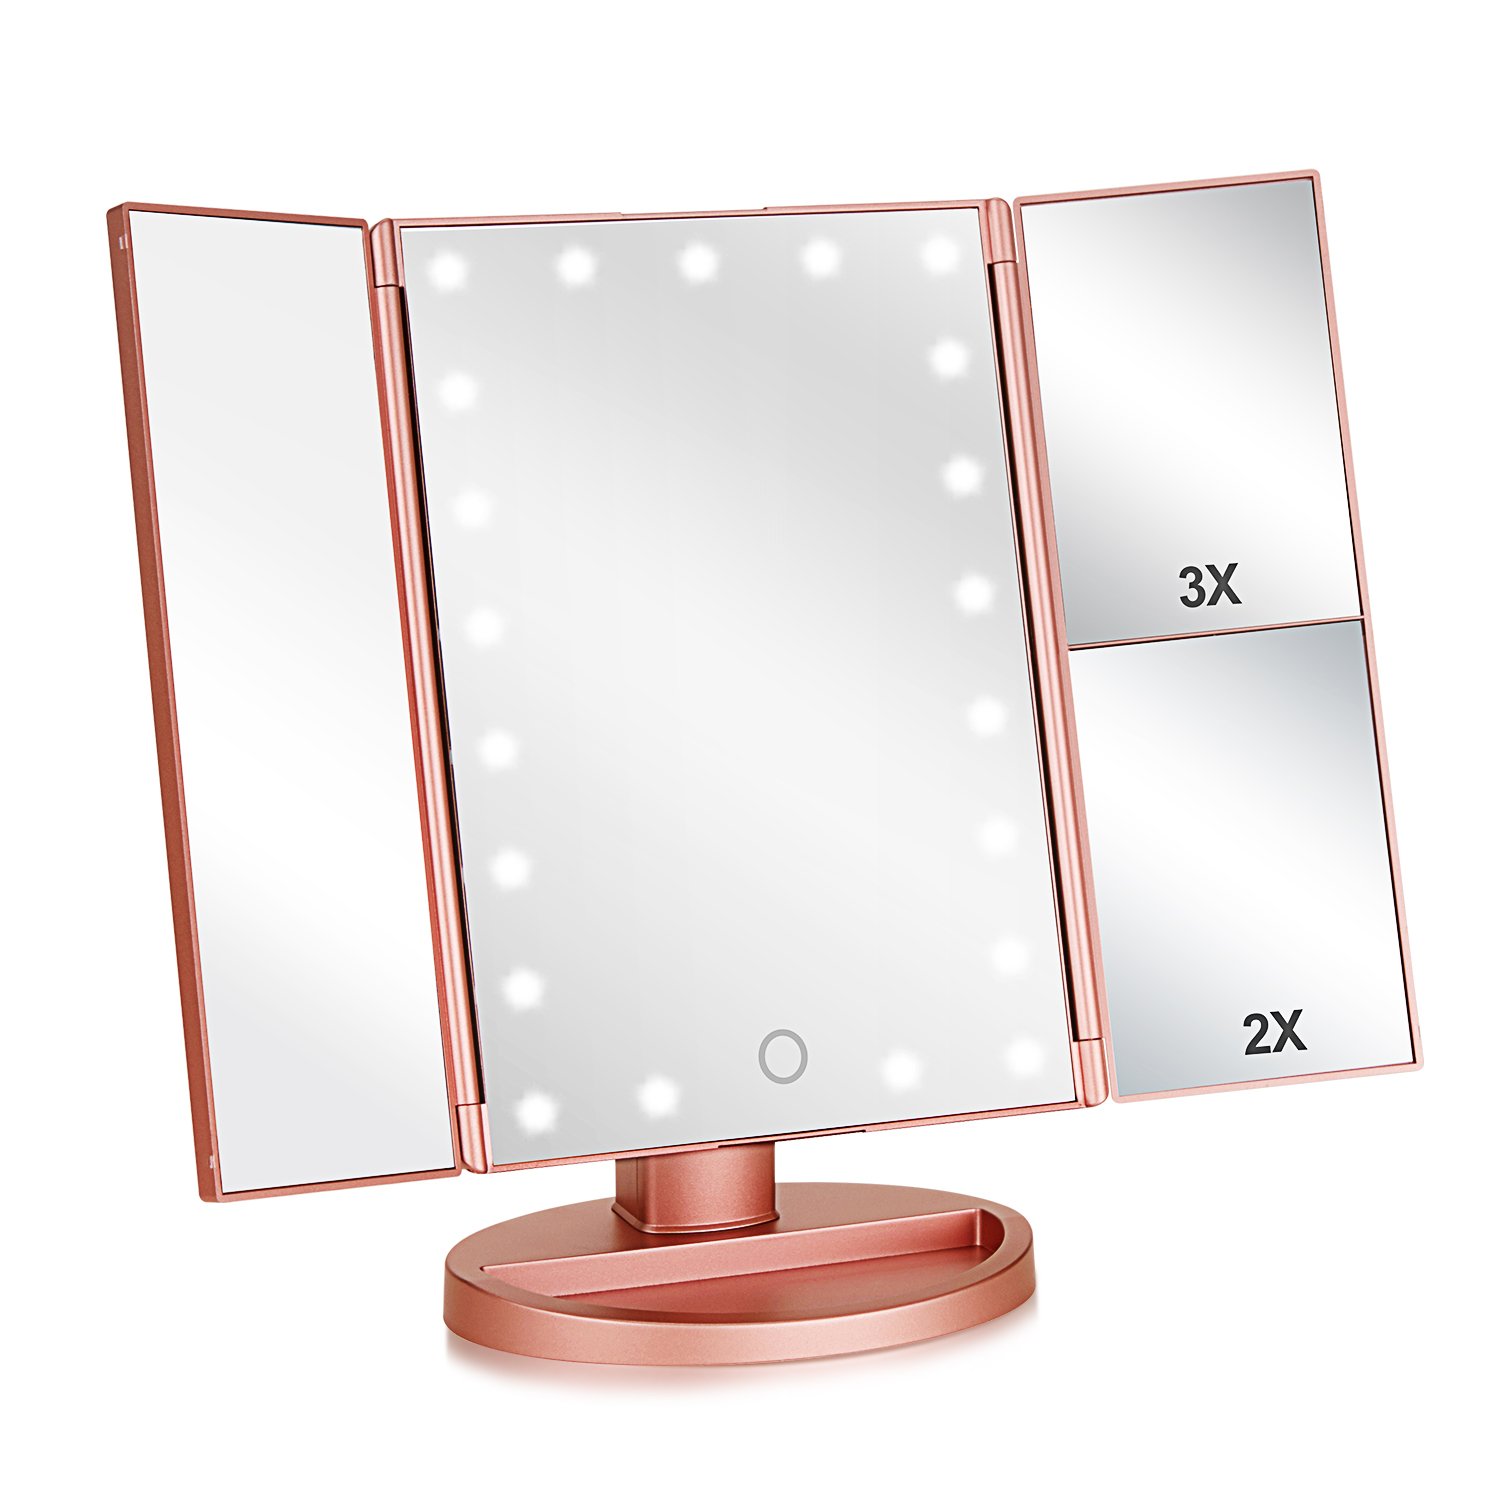 May ilaw na Makeup Mirror Magnification Touch Screen Rotation Countertop Cosmetic Mirror Decor